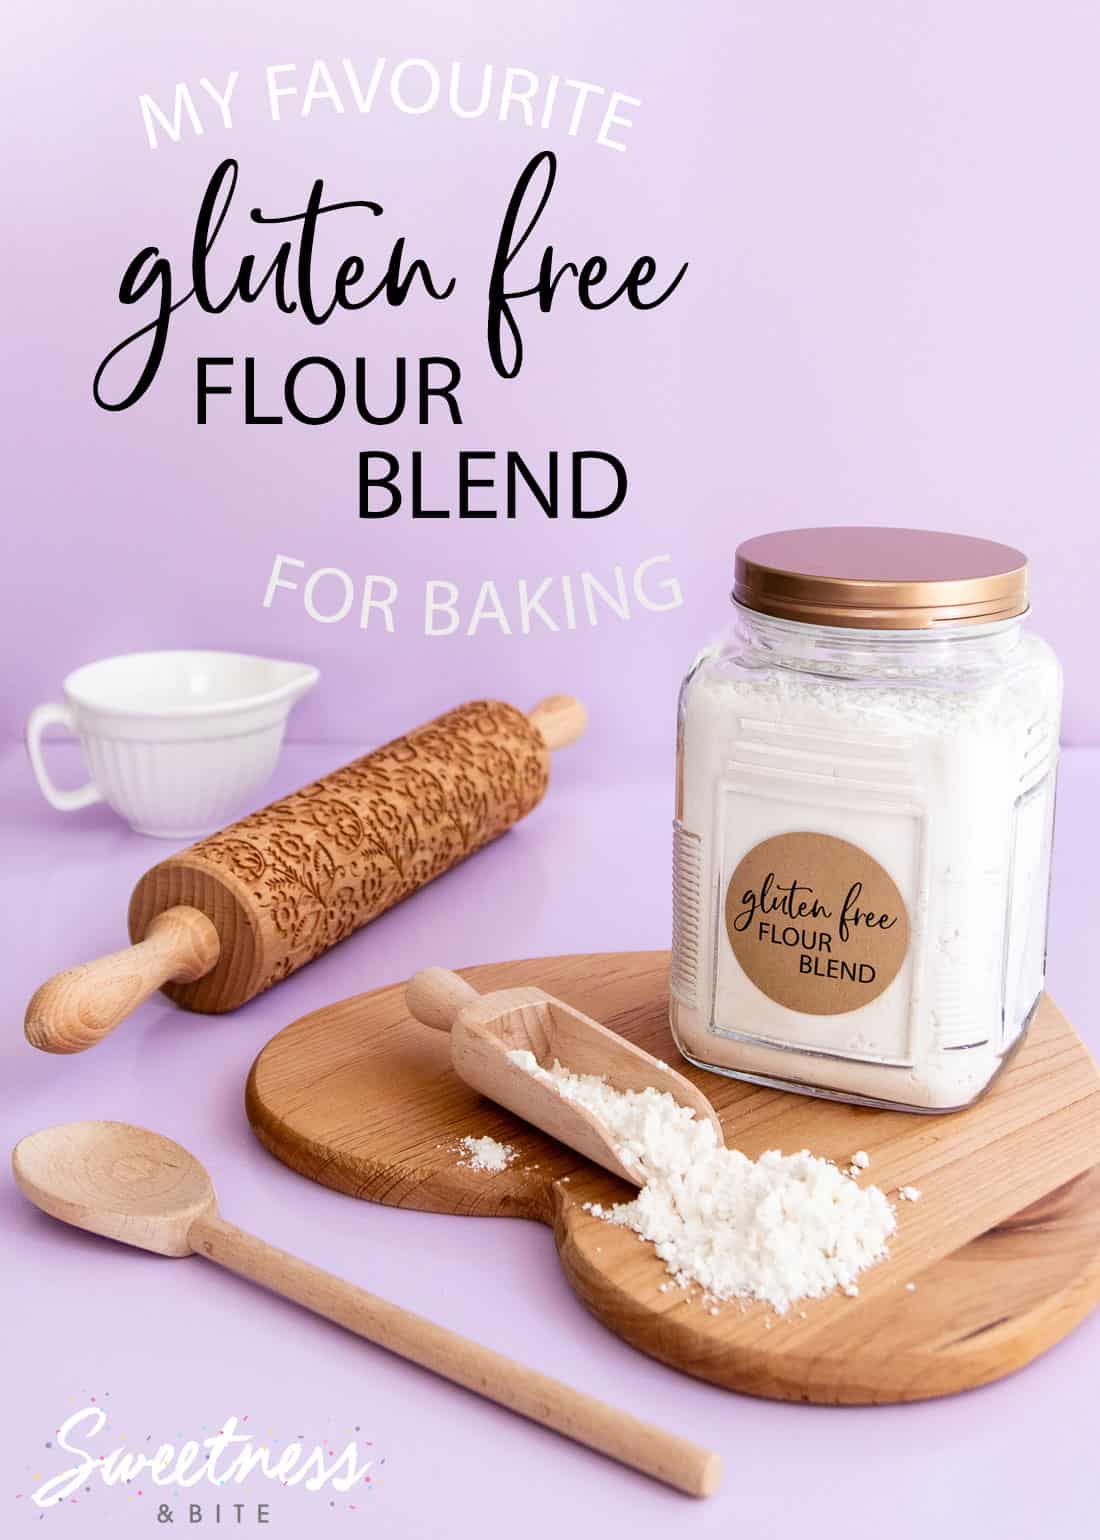 A jar of gluten free flour sitting on a wooden board, on a purple background, with text overlay reading "my favourite gluten free flour blend for baking"